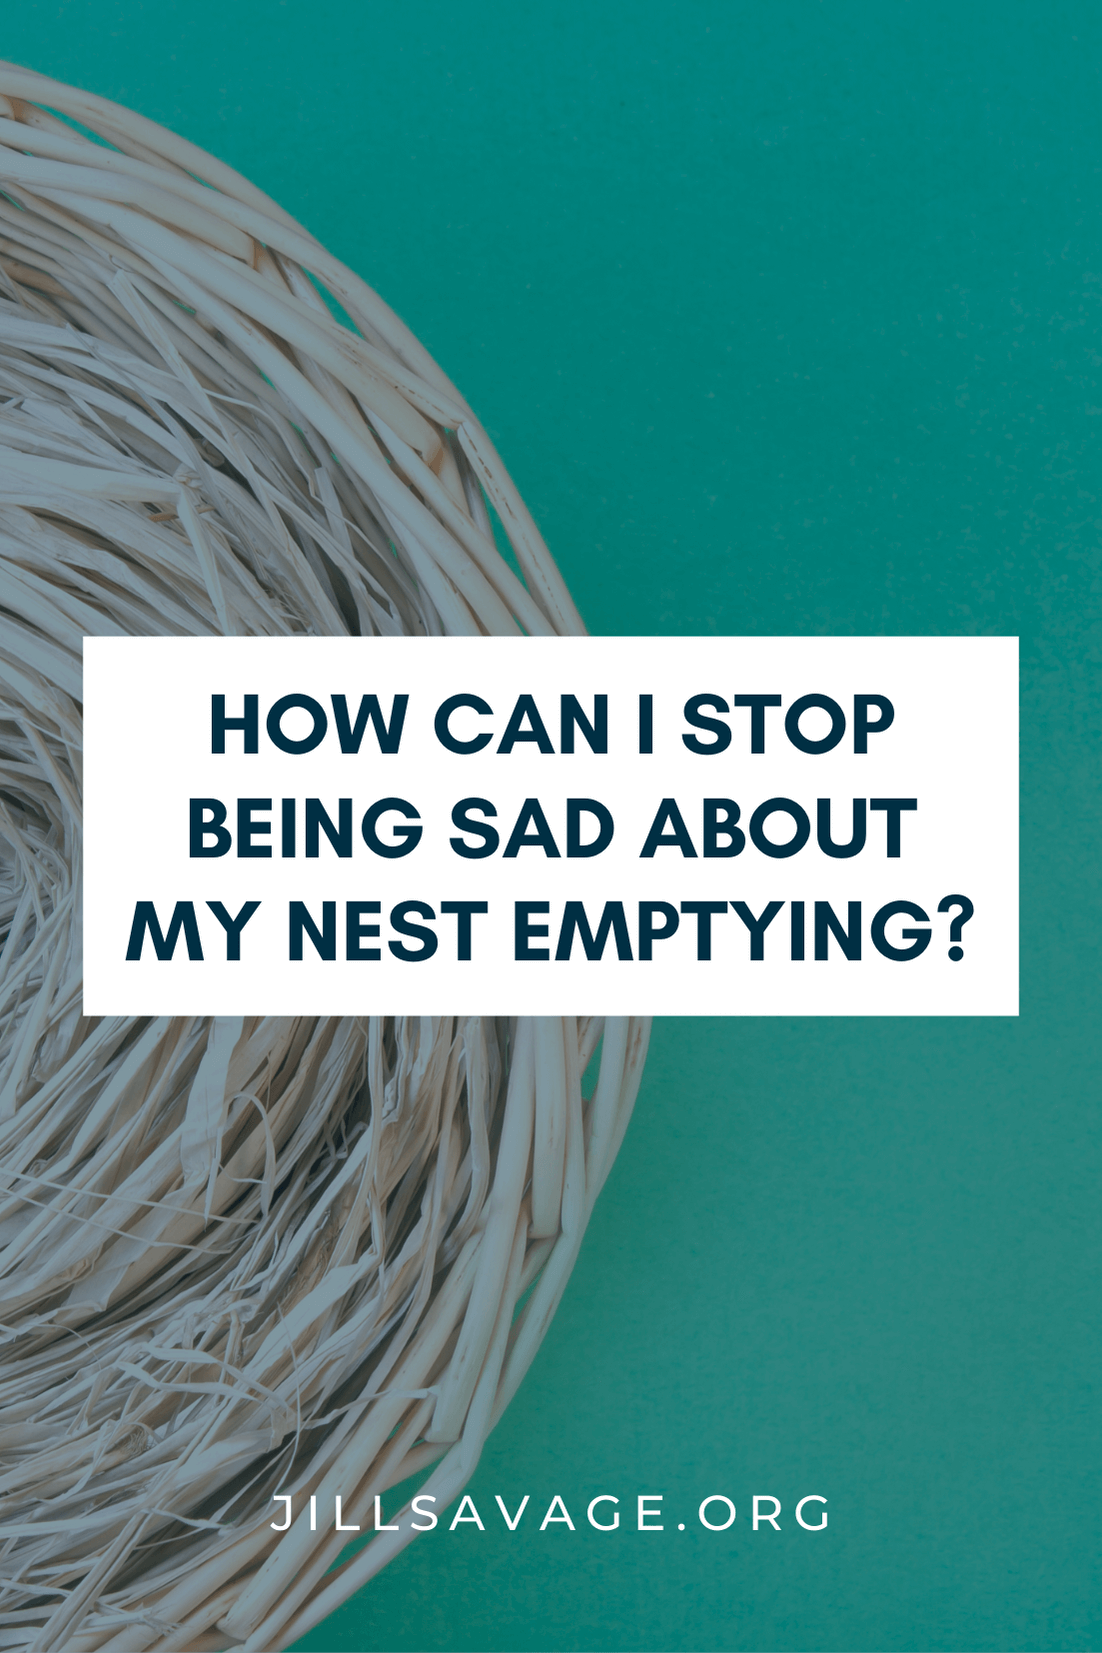 How Do I Stop Being Sad About My Nest Emptying?